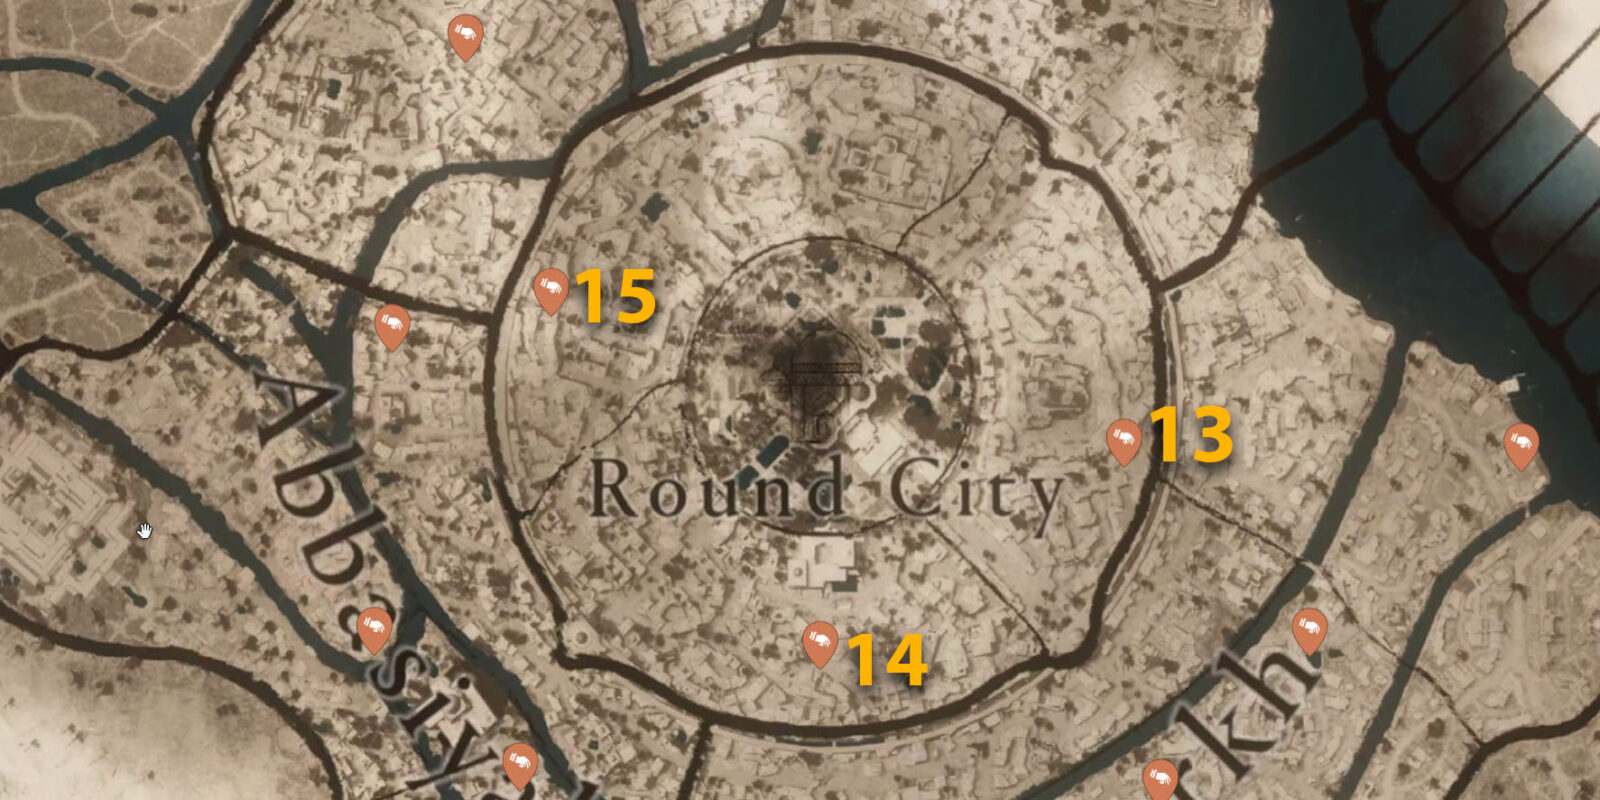 Round City Dervis' Artifacts locations